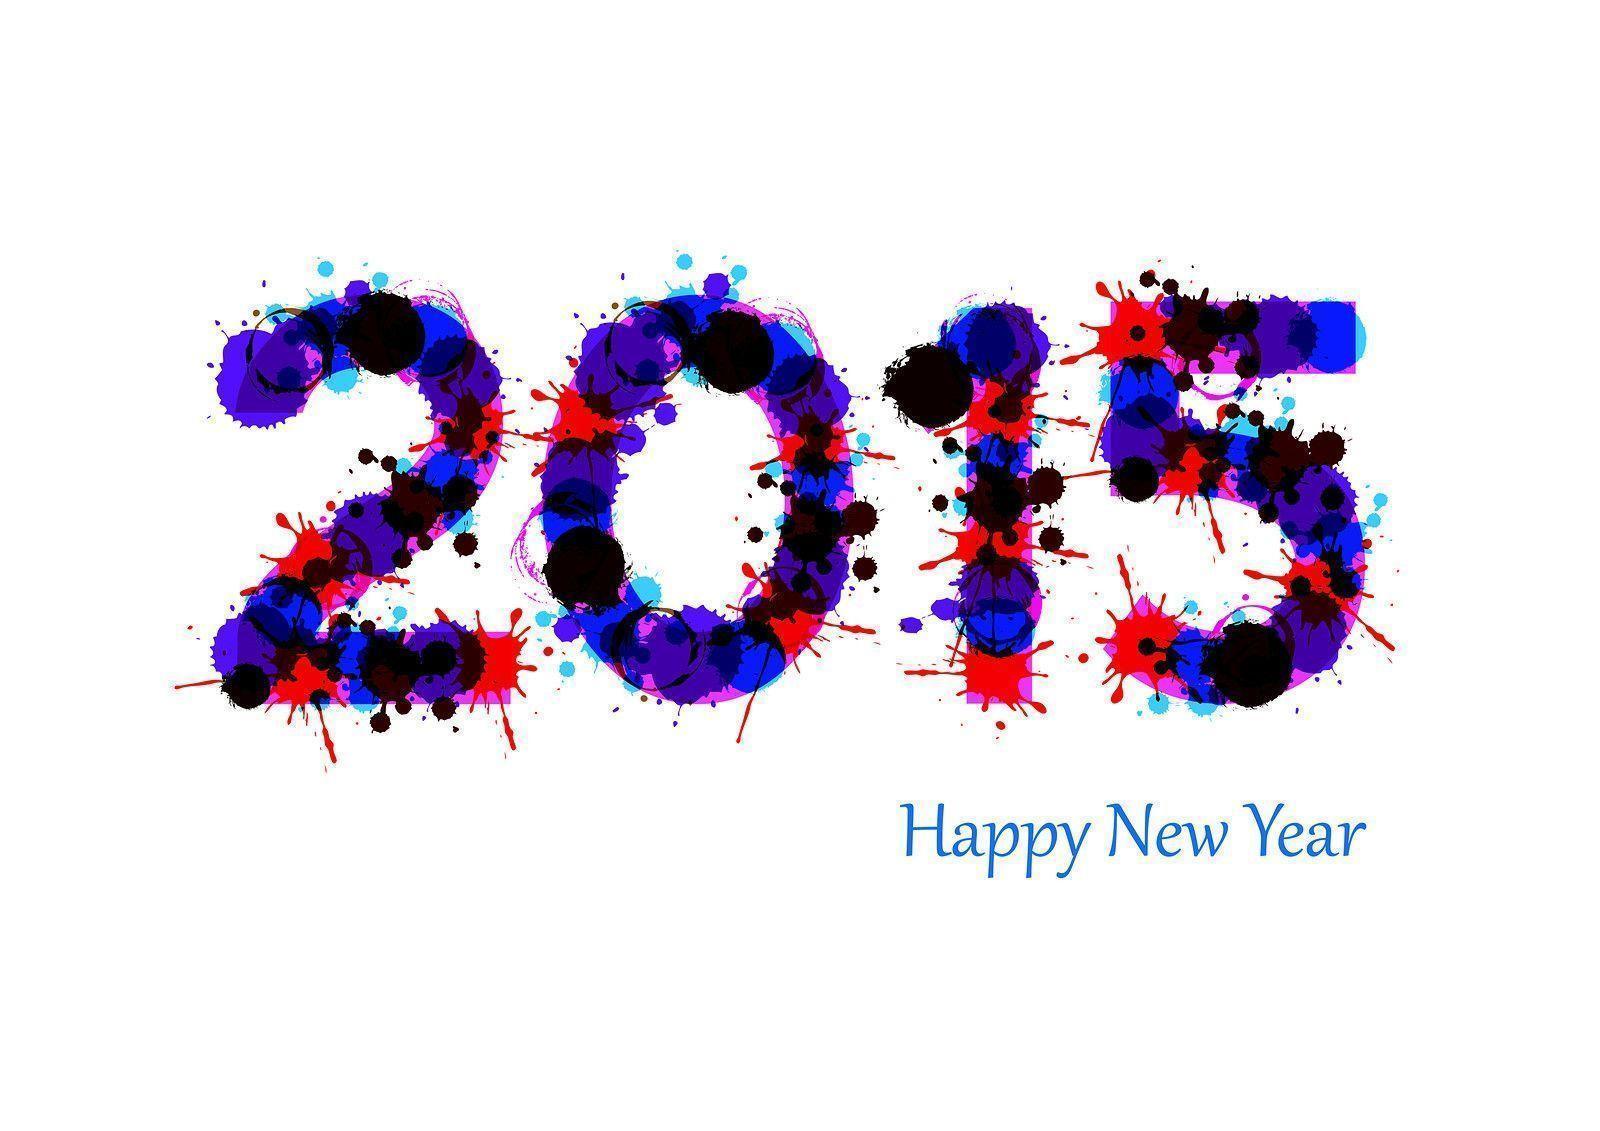 Happy New Year 2015 Image Picture Wallpaper Wallpaper